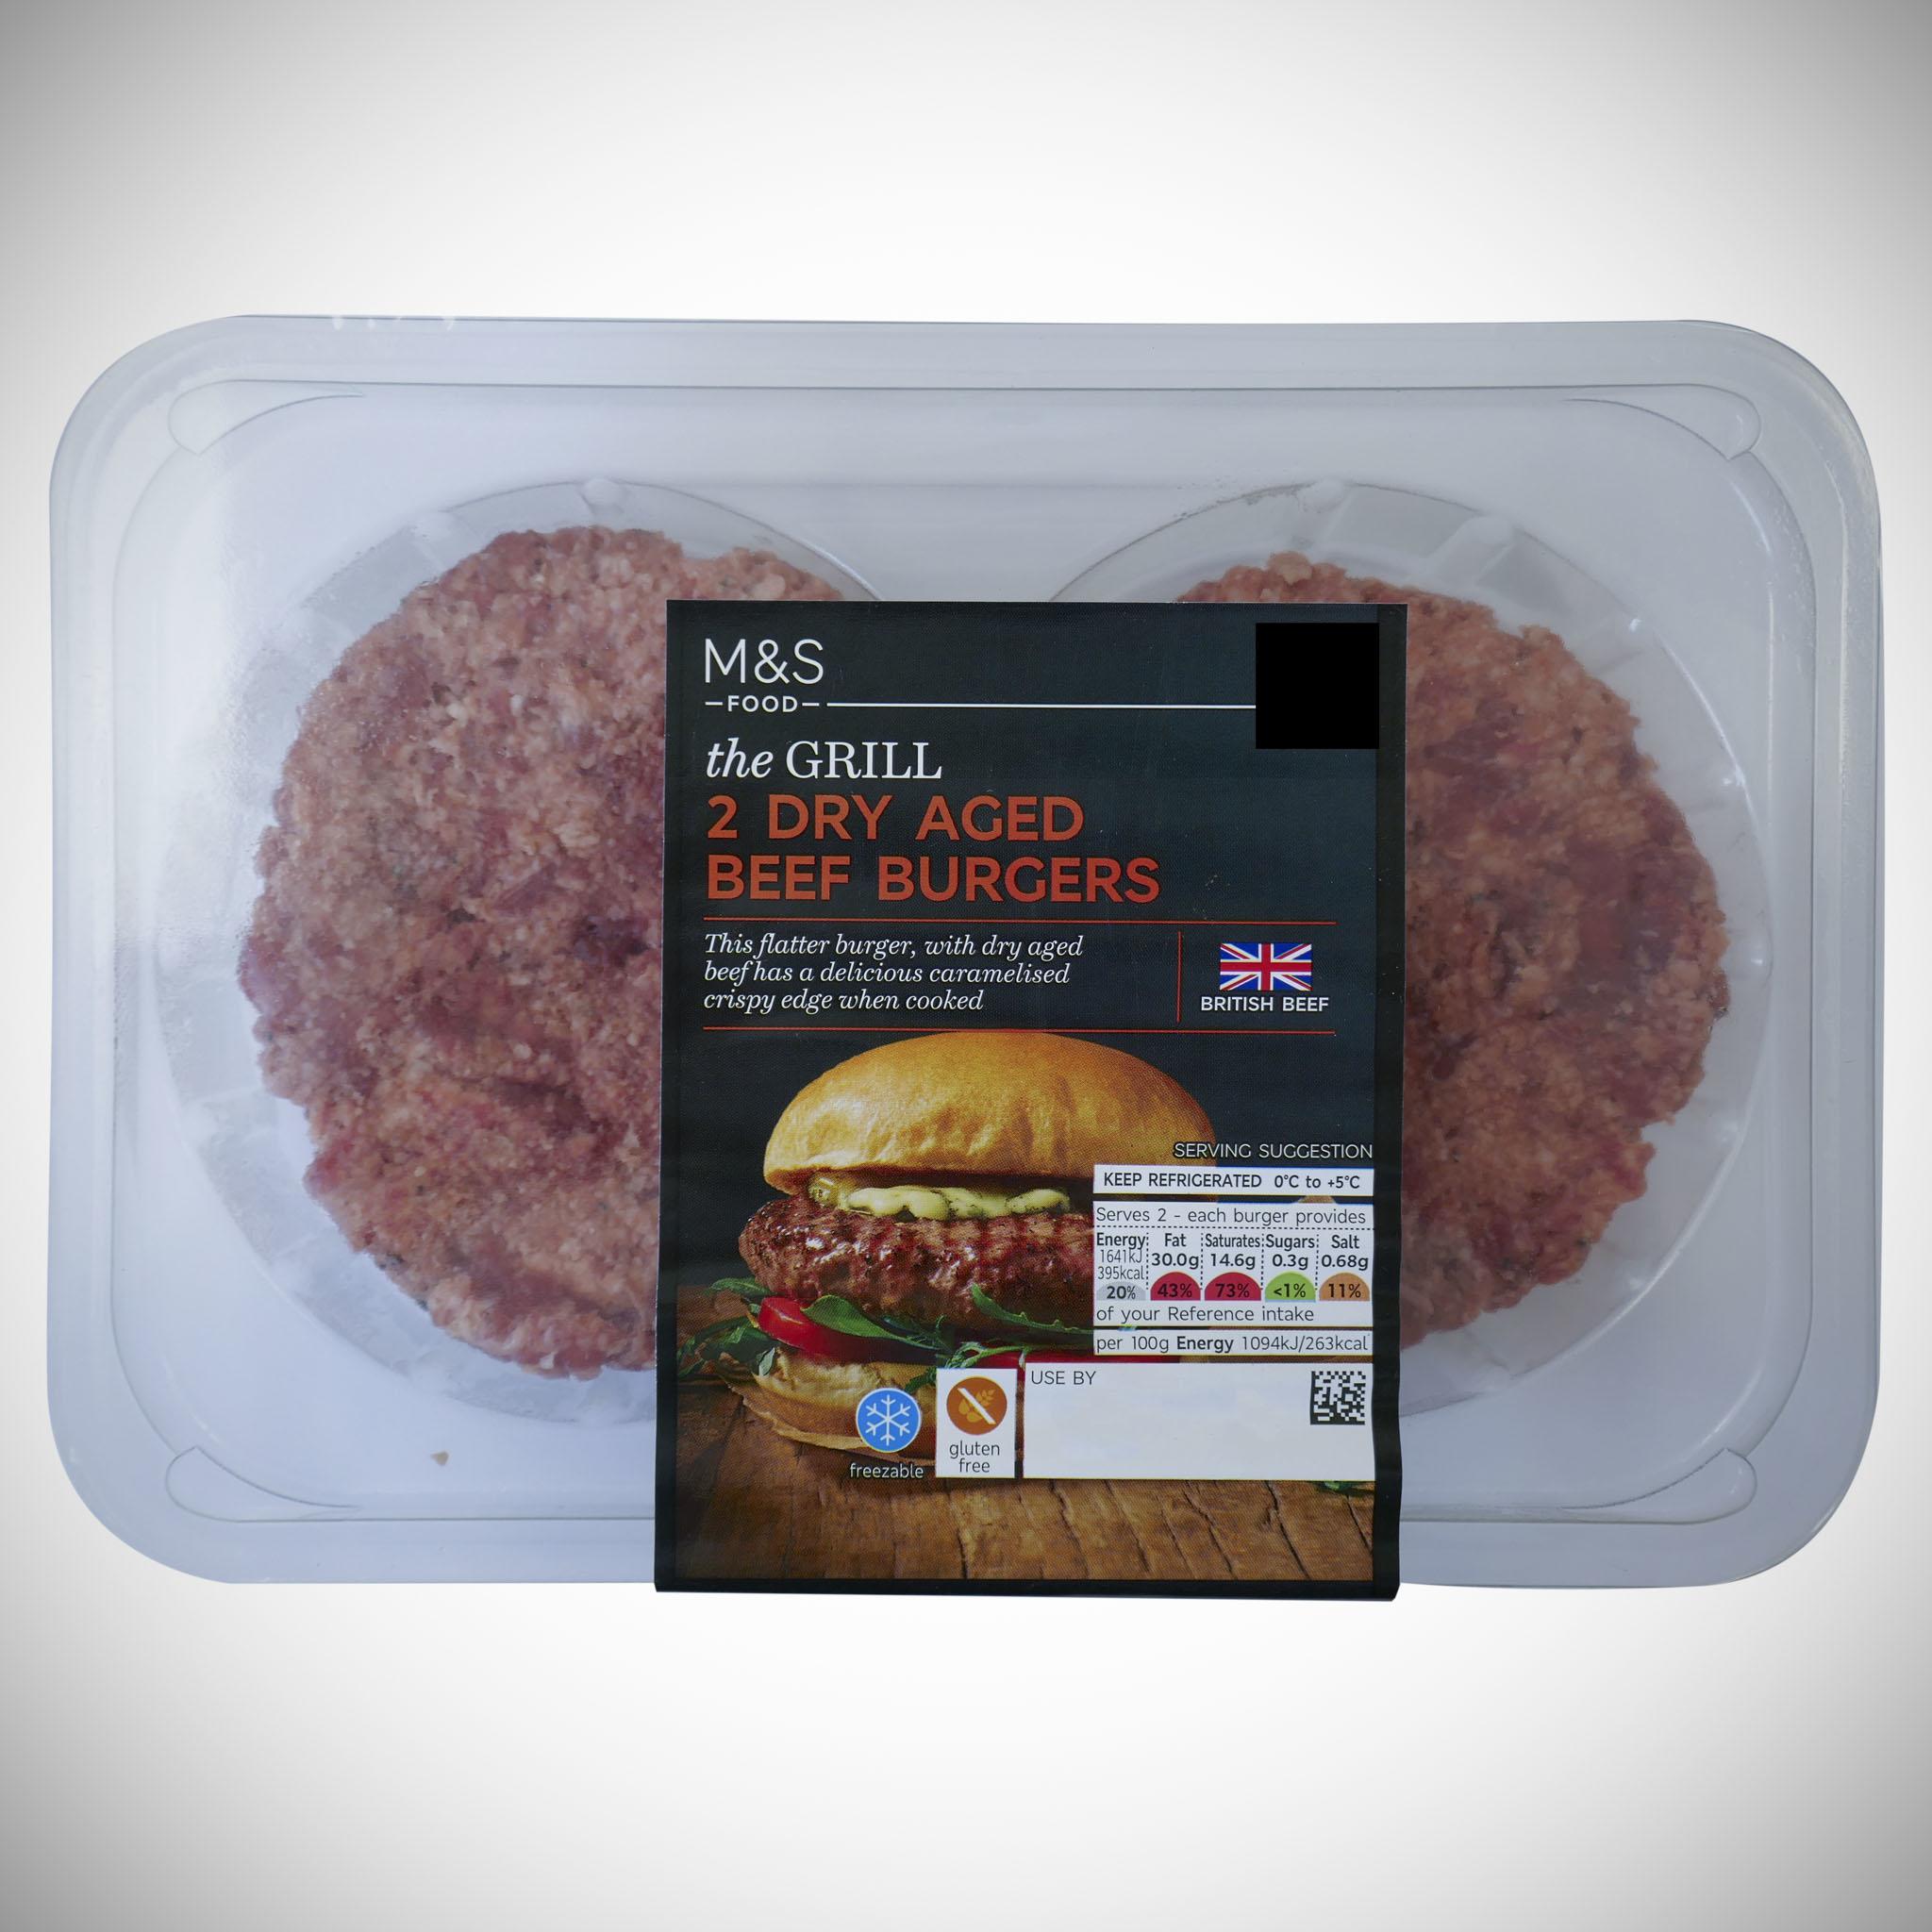 2 Dry Aged Beef Burgers 300g